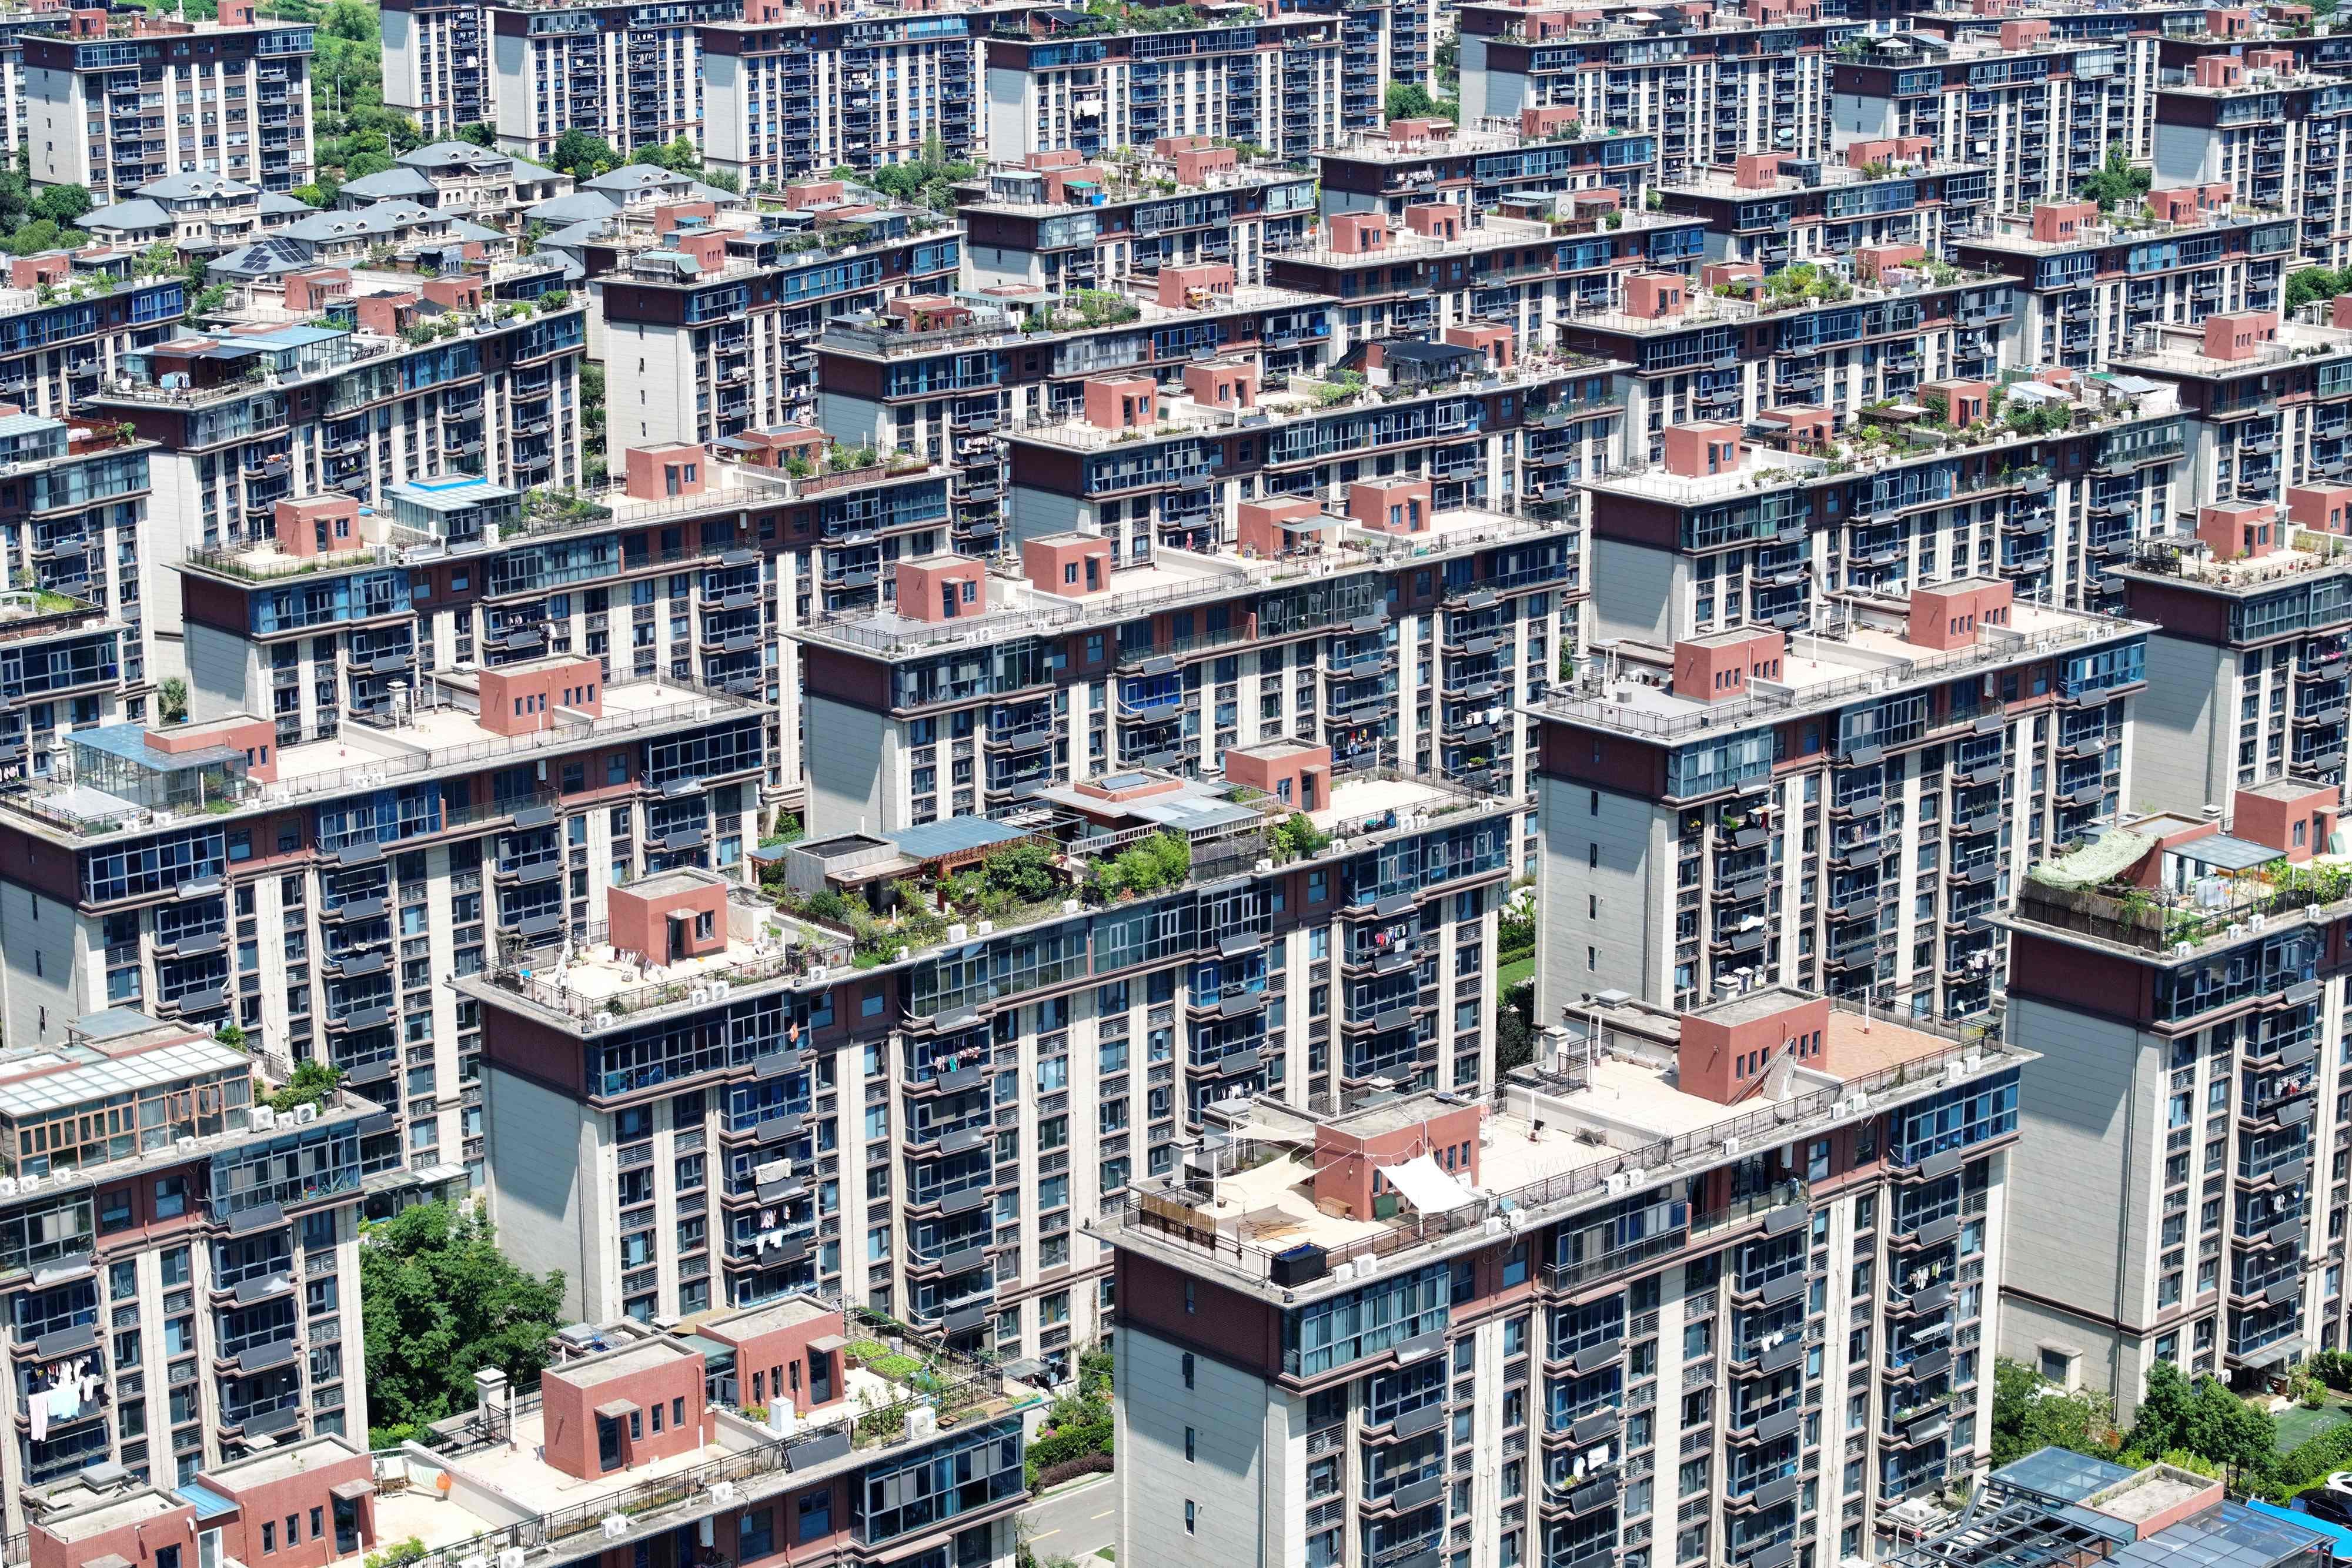 China is moving to curb debt risks across the country as a property crisis persists. Photo: AFP